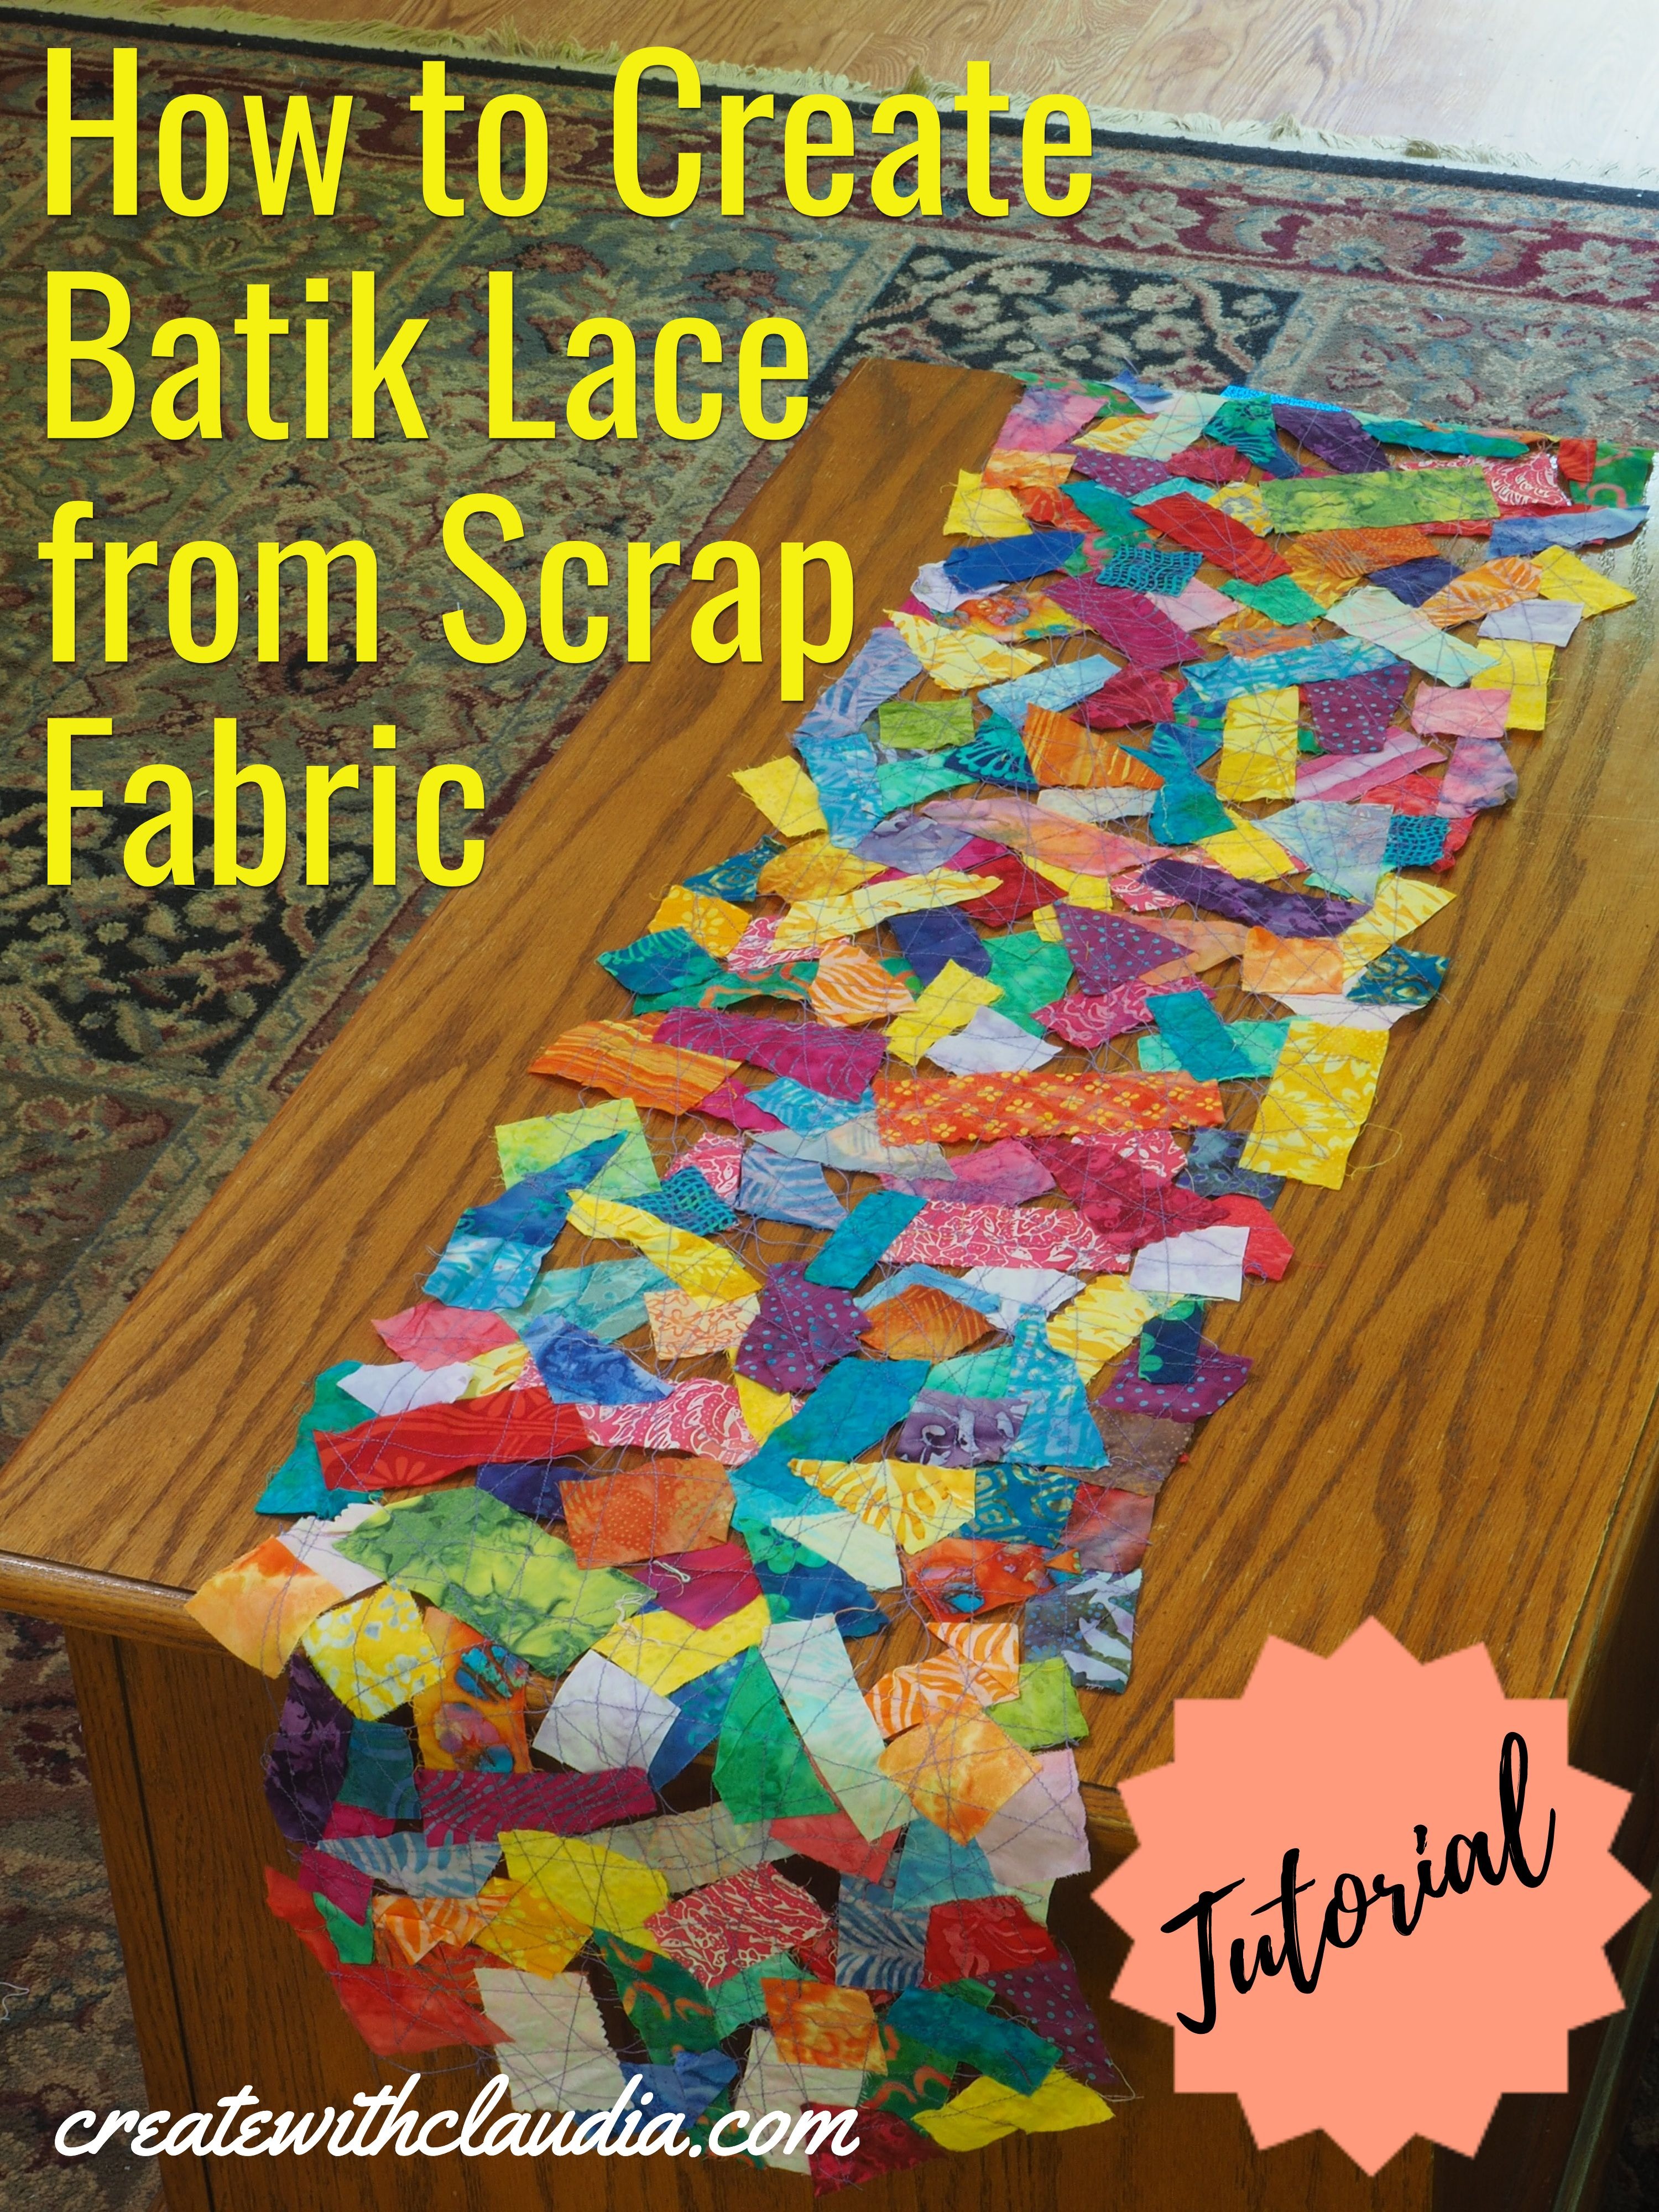 sewing ideas with scraps